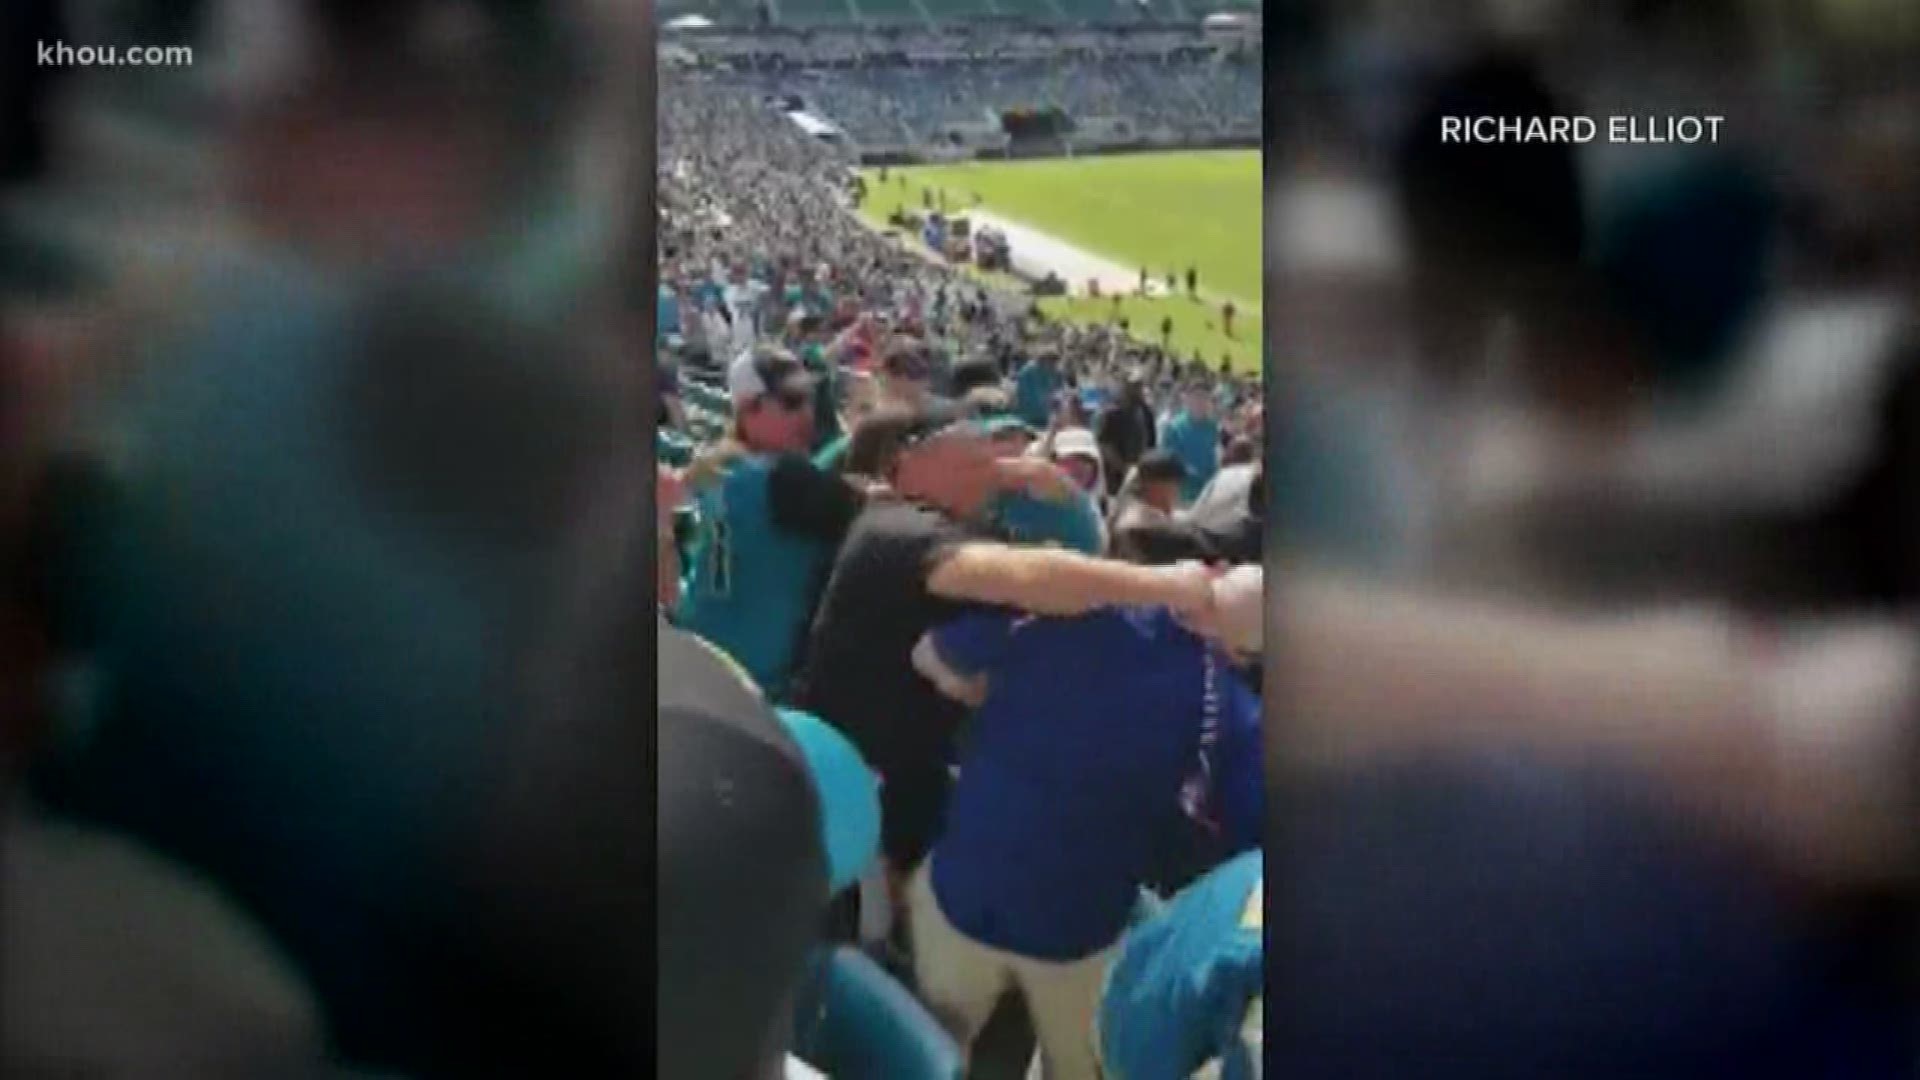 Two fans involved in an altercation at the Texans-Jaguars have been banned from buying tickets to Jaguar games, the team announced Monday.